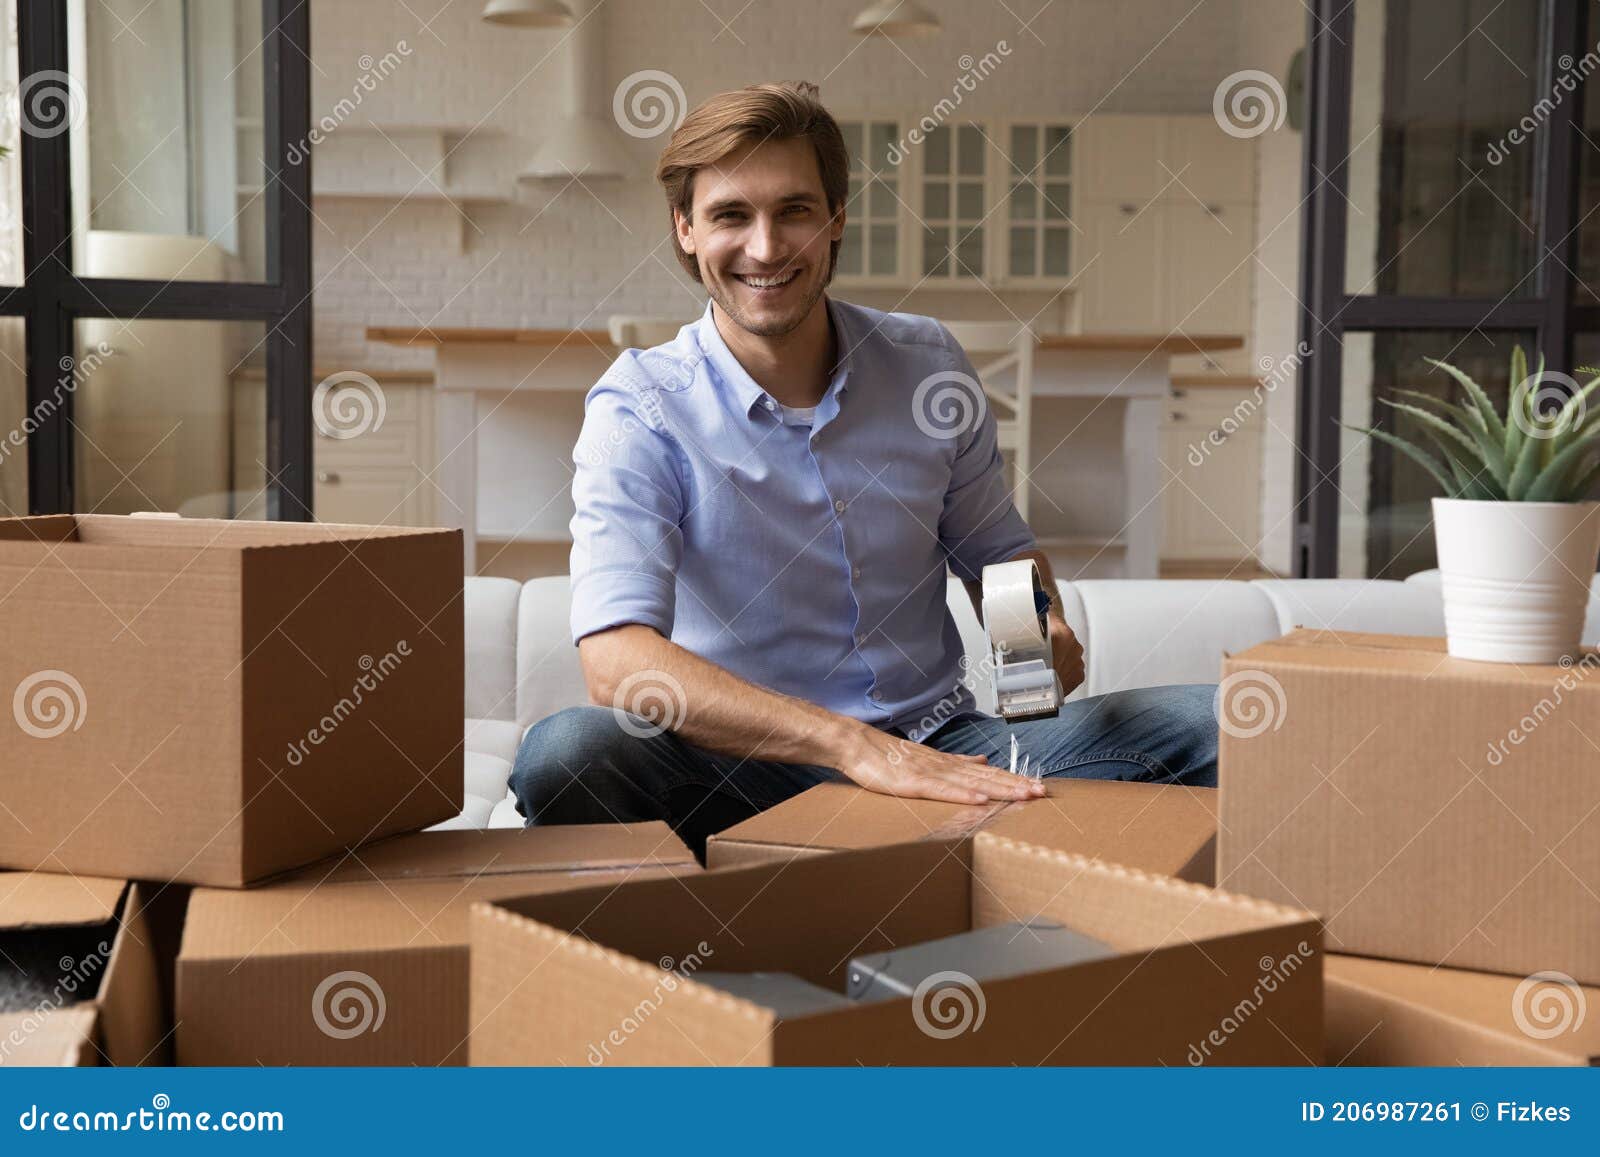 portrait of smiling man pack boxes relocating to new home